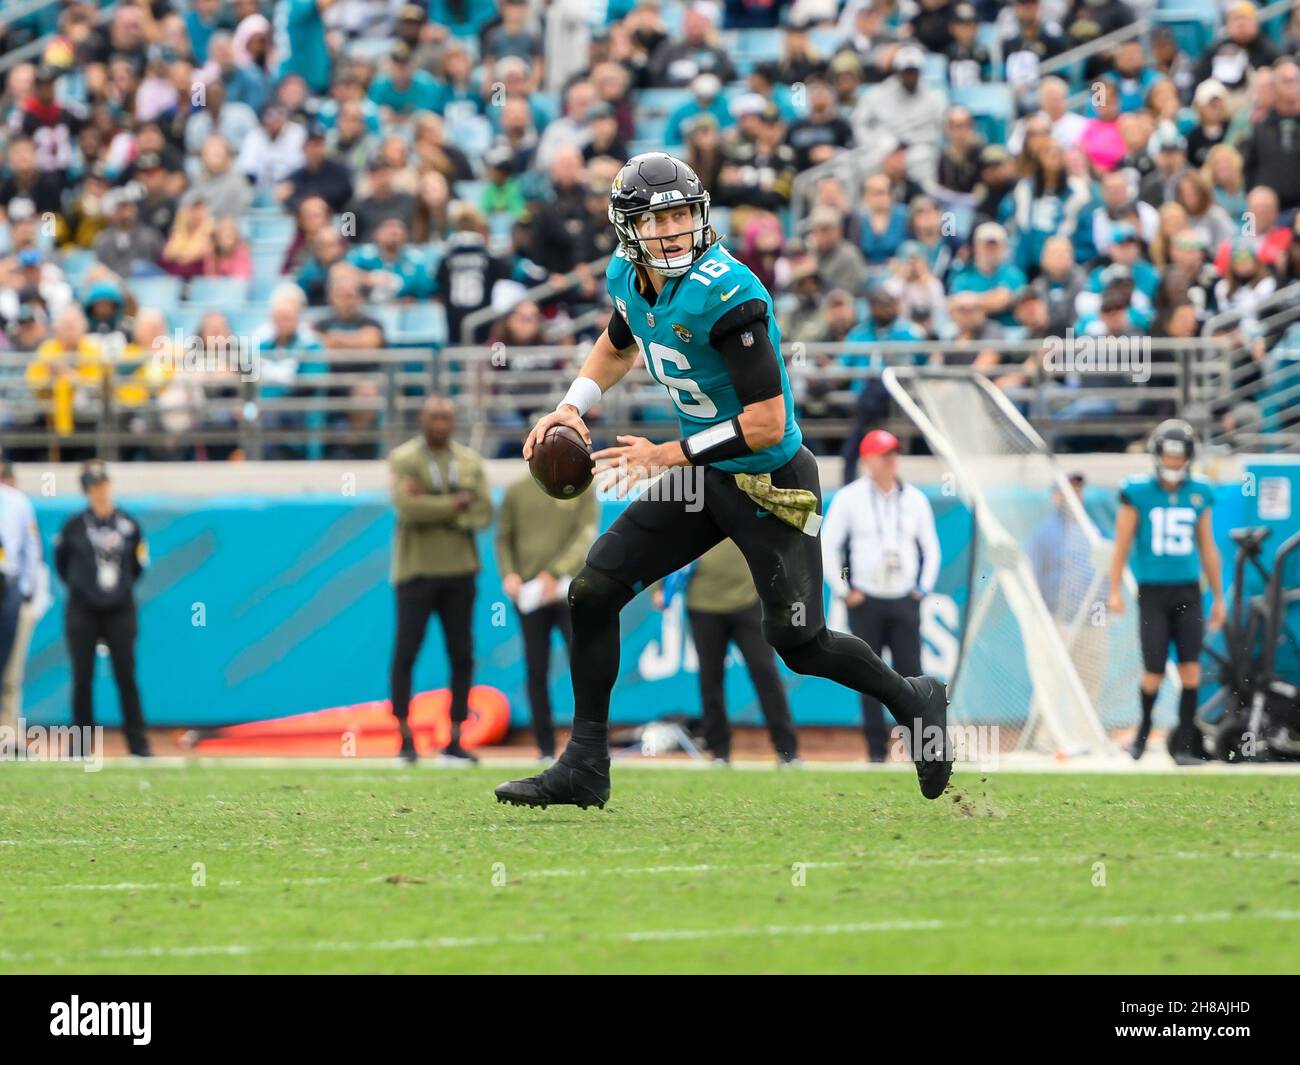 Jacksonville, FL, USA. 28th Nov, 2021. Jacksonville Jaguars quarterback Trevor Lawrence (16) looks for a receiver during 2nd half NFL football game between the Atlanta Falcons and the Jacksonville Jaguars. Falcons. Defeated Jaguars 21-14 at TIAA Bank Field in Jacksonville, Fl. Romeo T Guzman/CSM/Alamy Live News Stock Photo